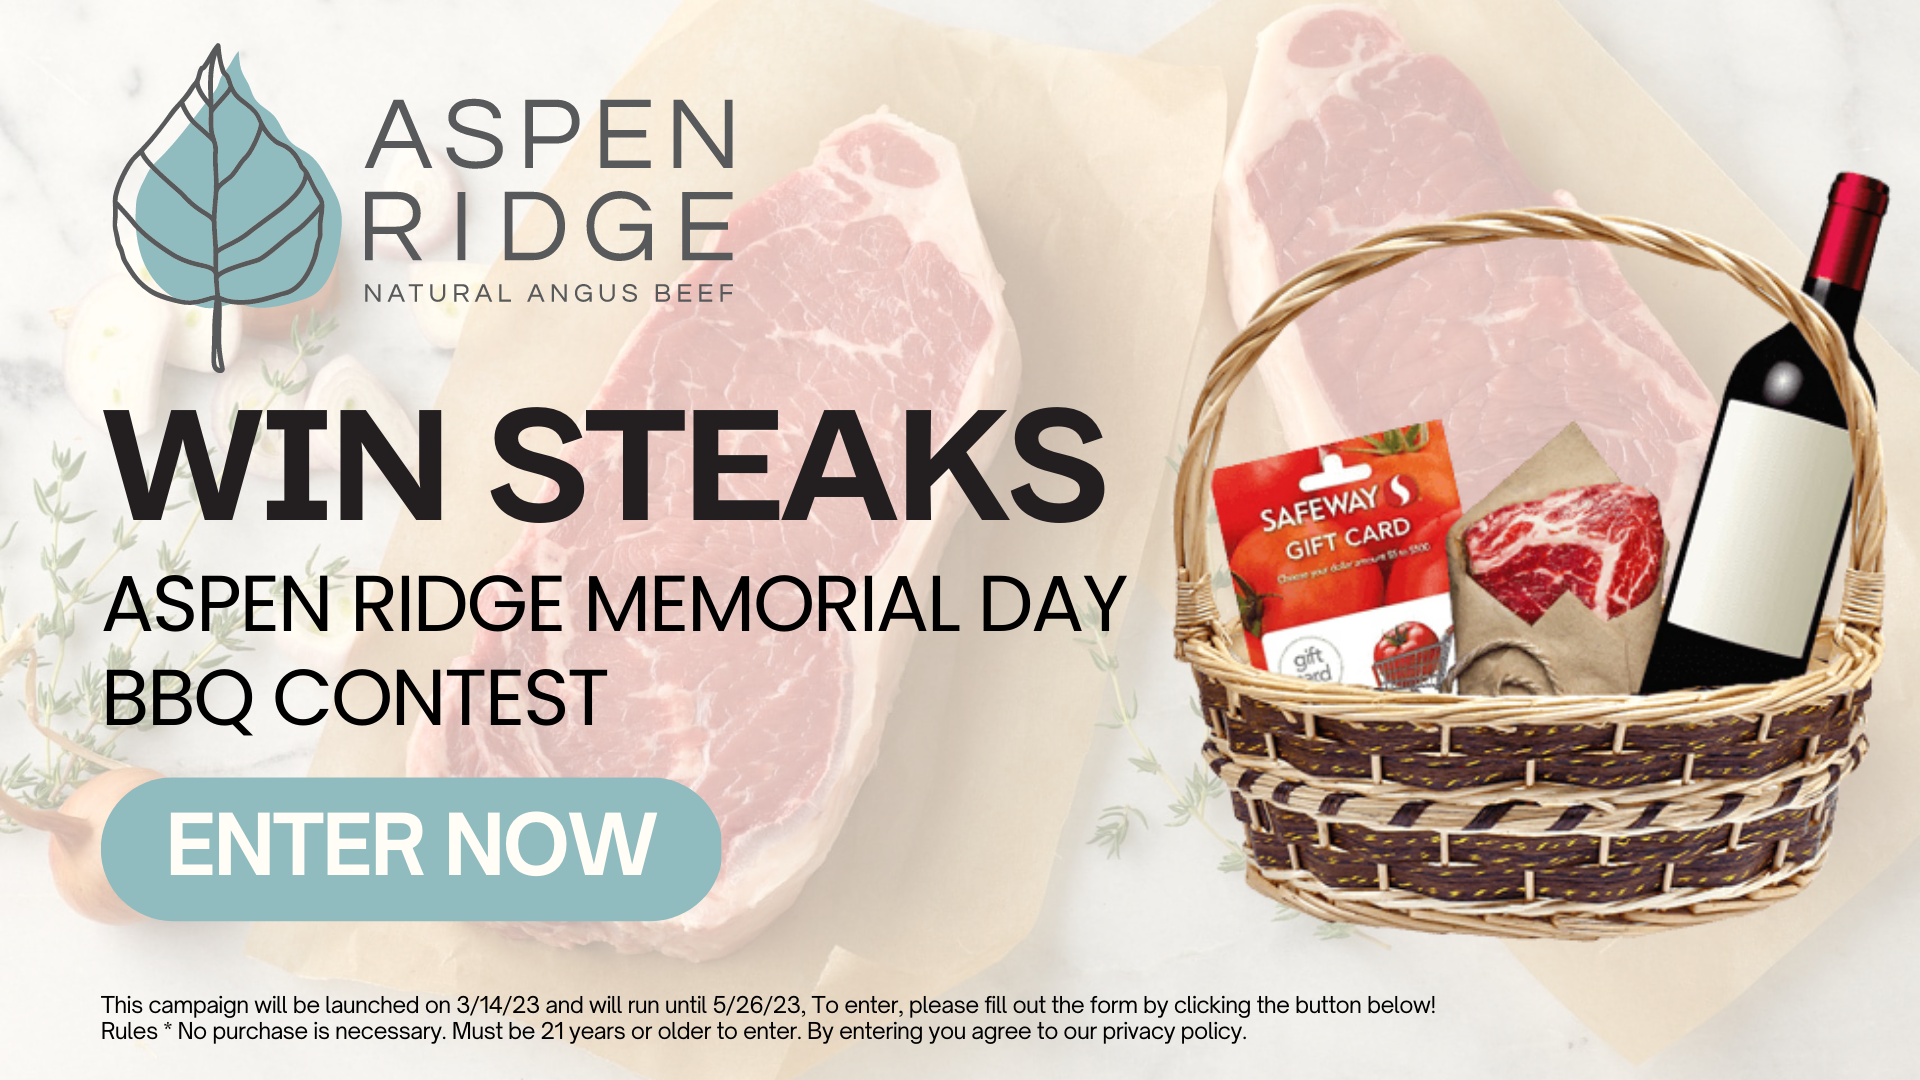 To enter our contest, fill out our form before May 26th for a chance to win this fantastic prize pack. Just imagine the thrill of impressing your guests with premium-quality beef cuts from Aspen Ridge Natural Angus Beef, and having all the necessary grilling essentials from Safeway to make the perfect BBQ feast honoring those who have served our country.